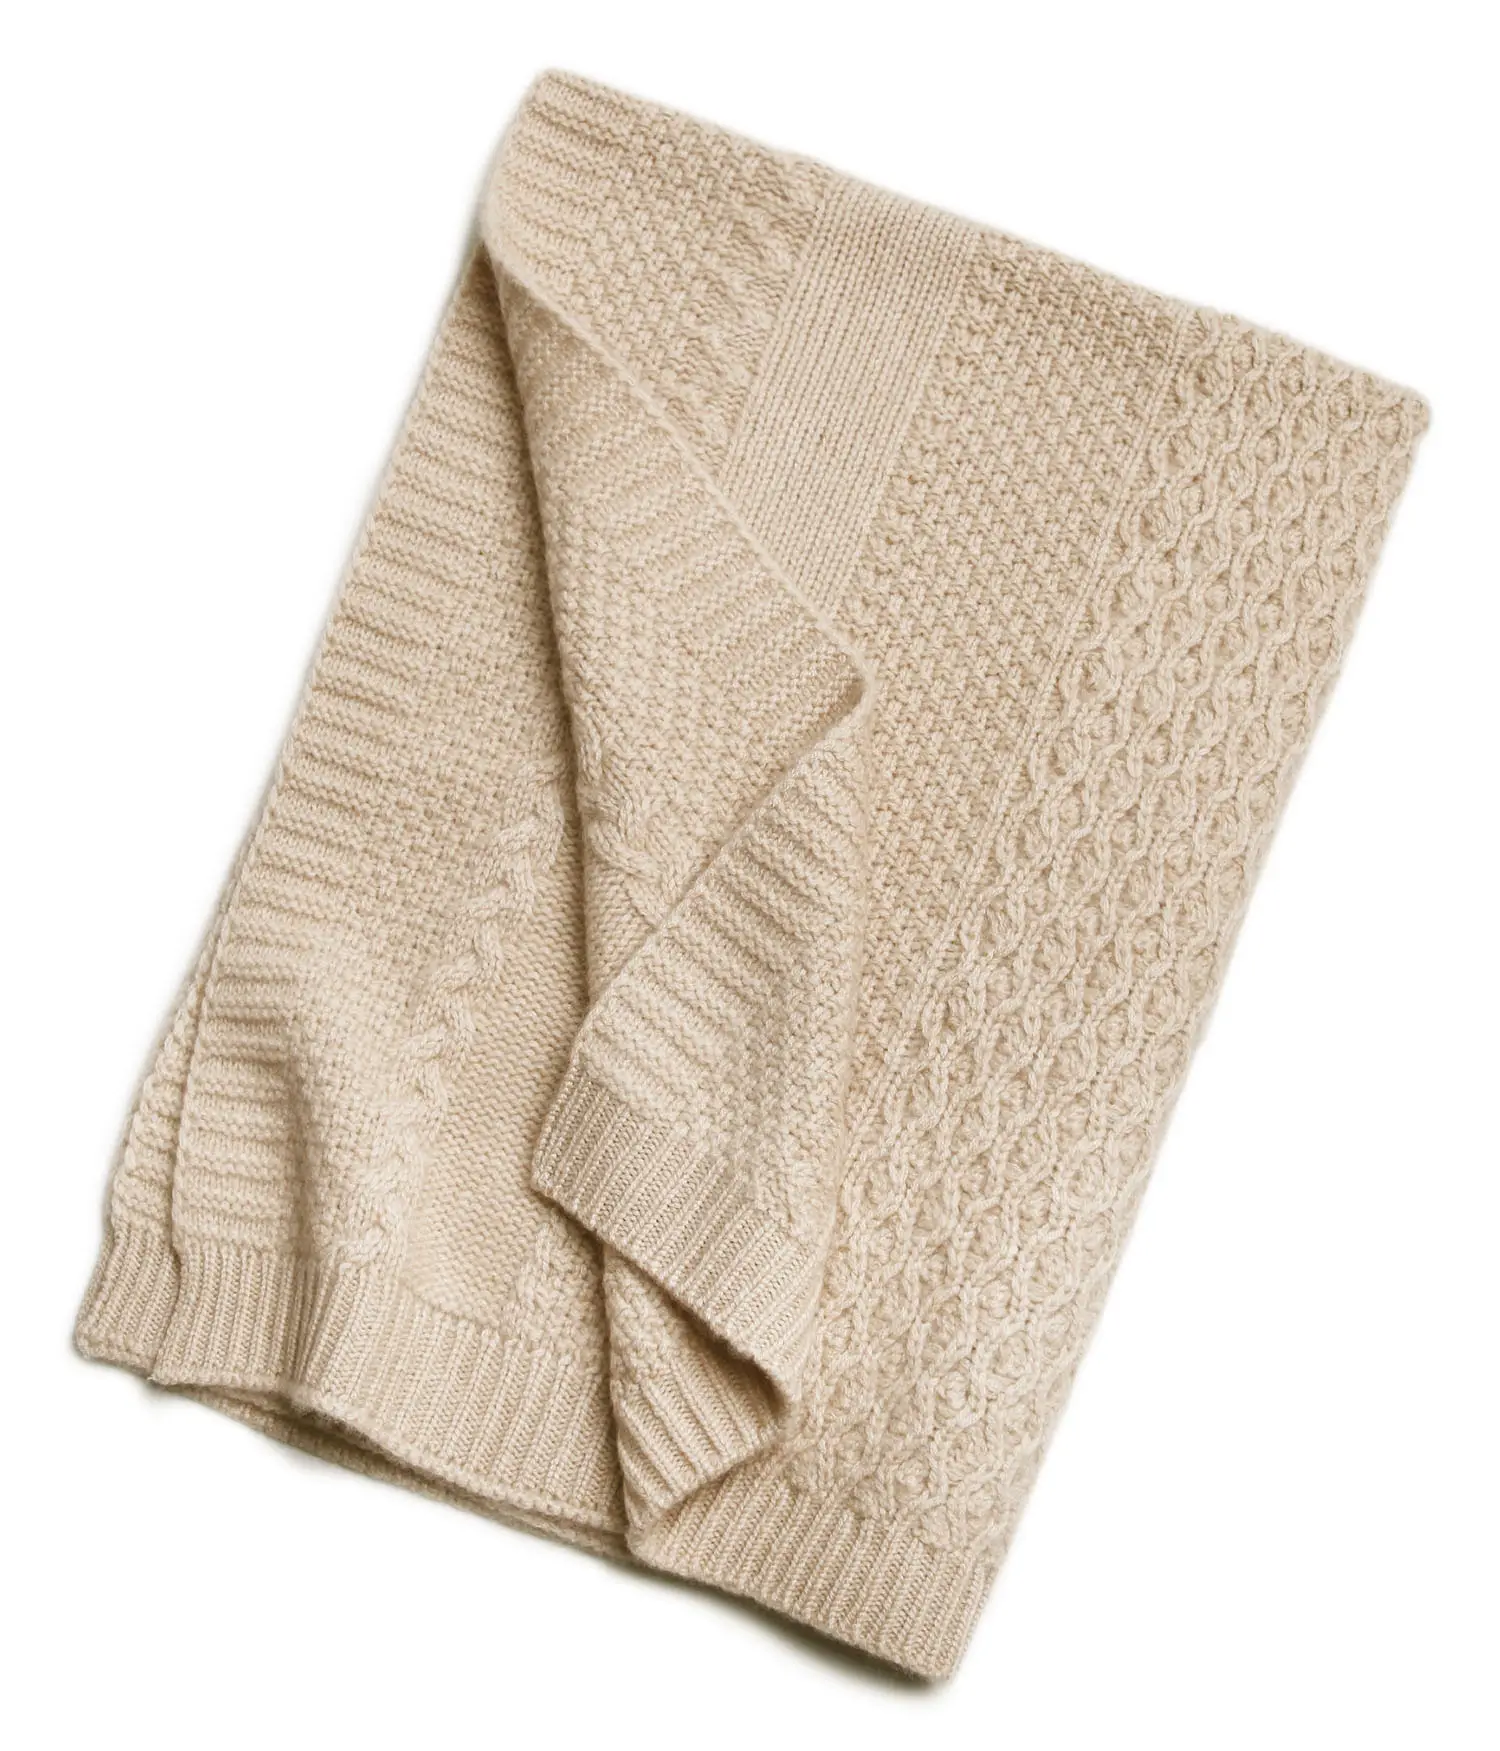 Winter cable weighted honeycomb design luxury thick knit baby cashmere infant throw blanket swaddle